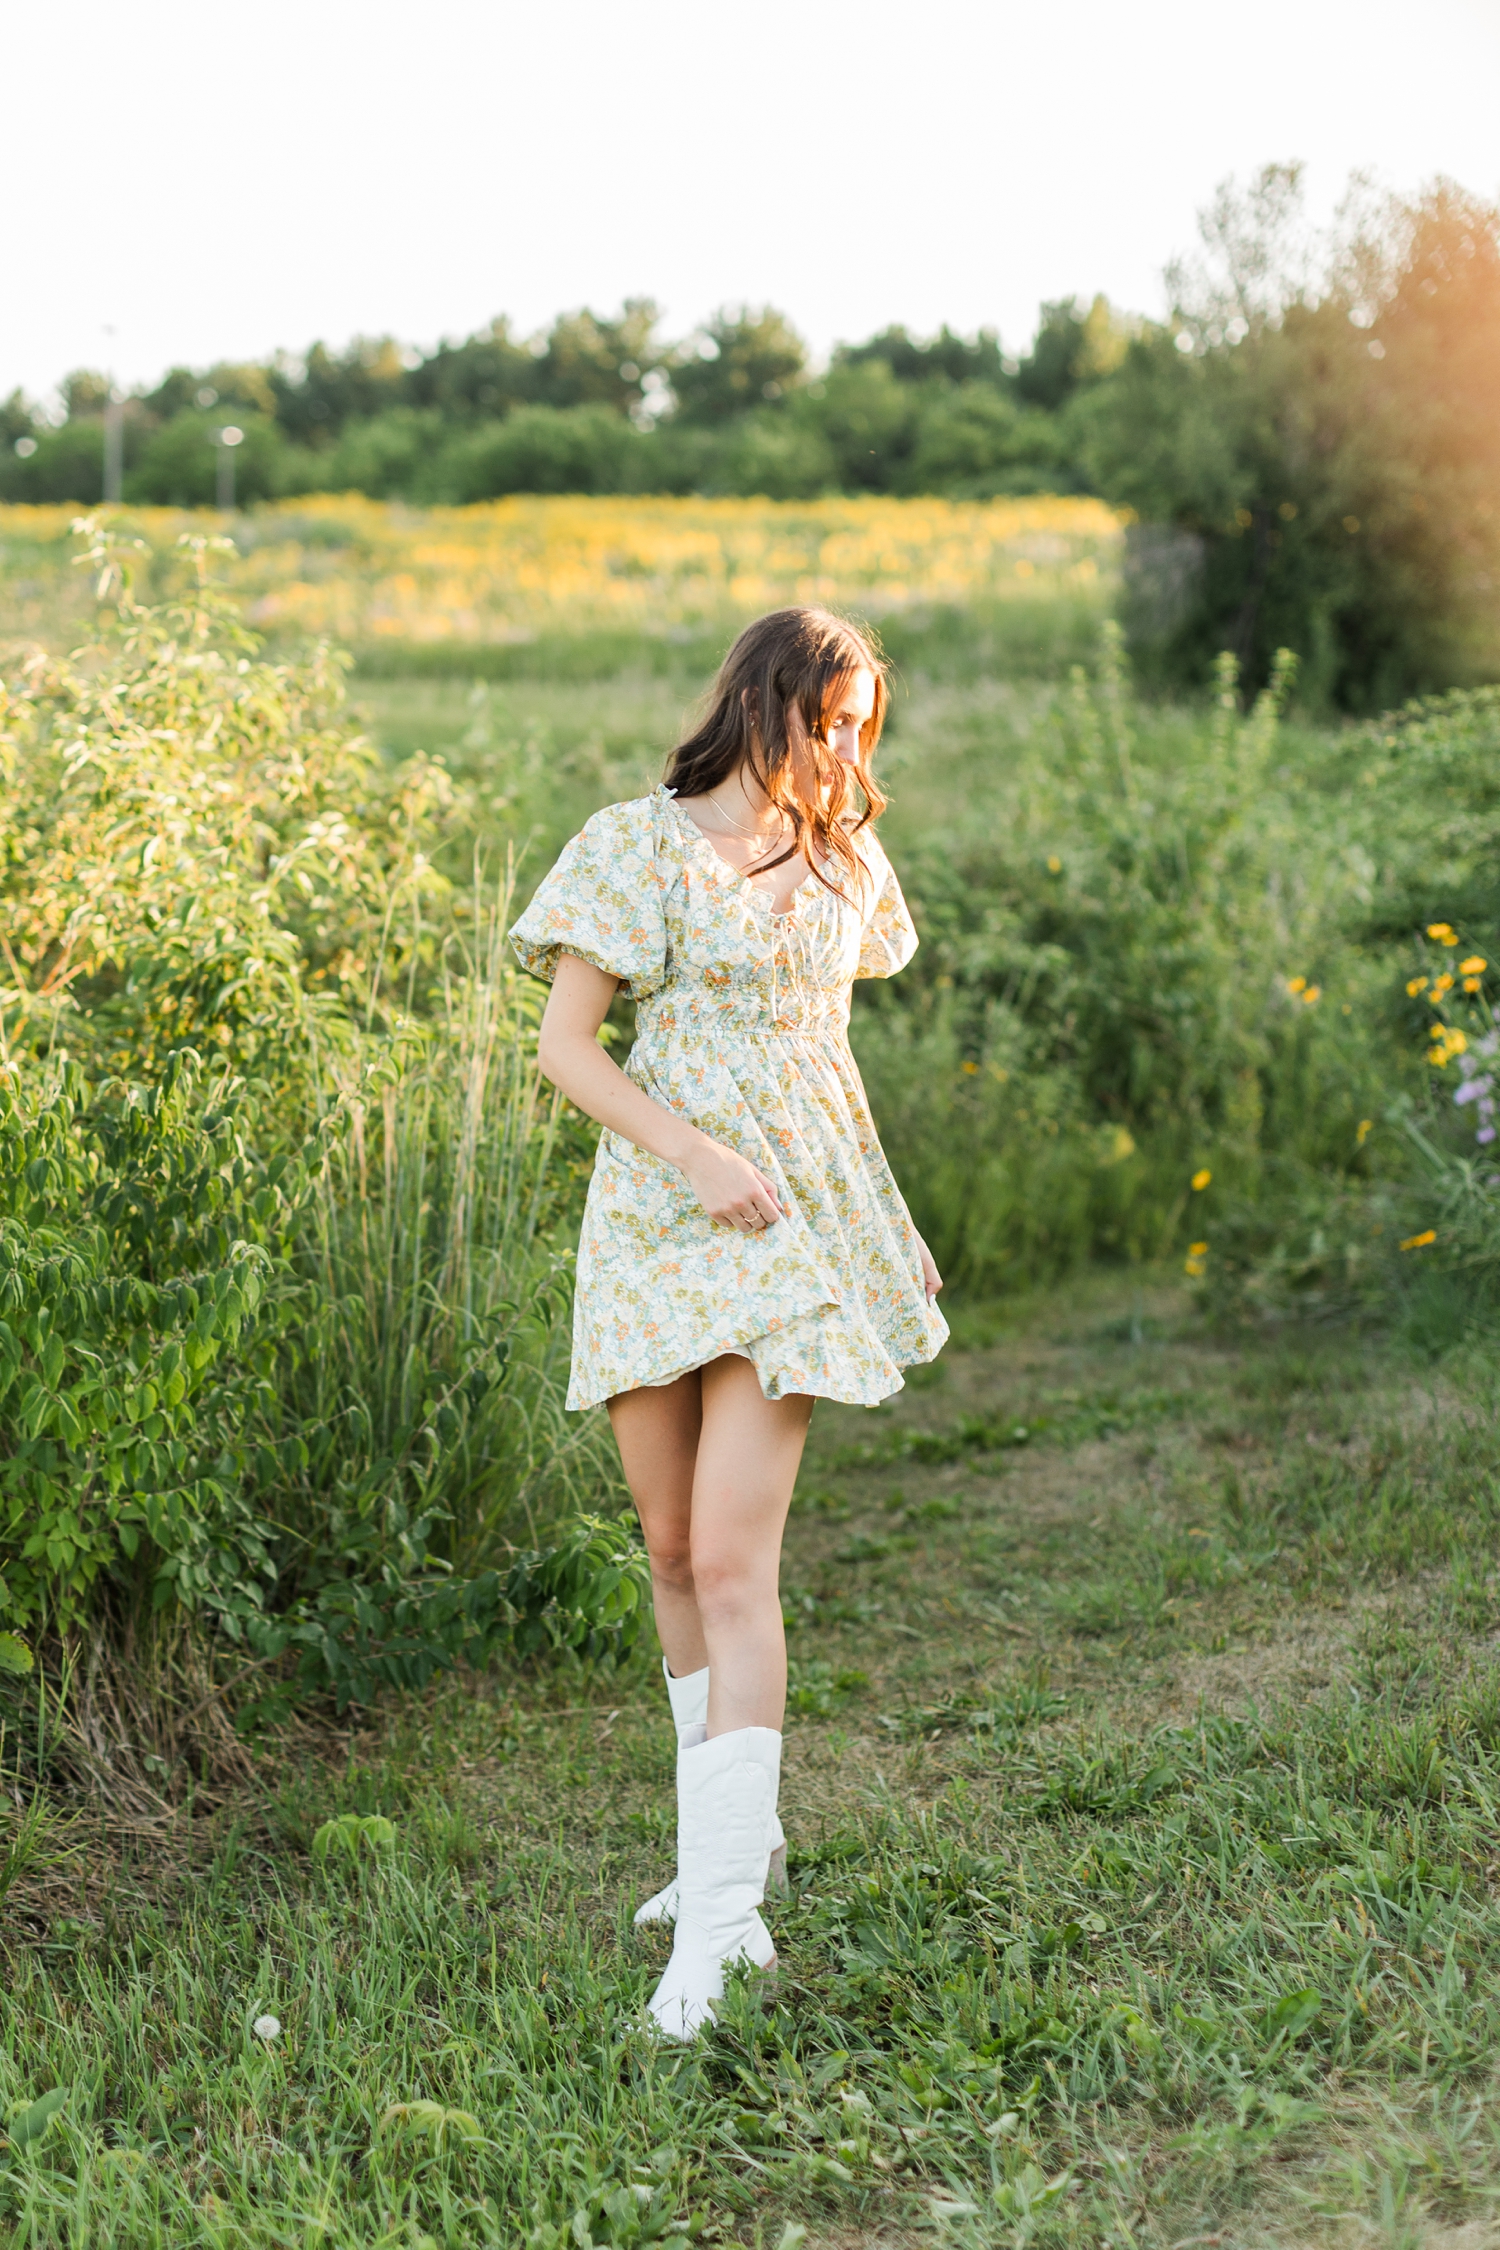 Mallory dances in a field of yellow wildflowers wearing a green and yellow floral dress and white cowgirl boots | CB Studio